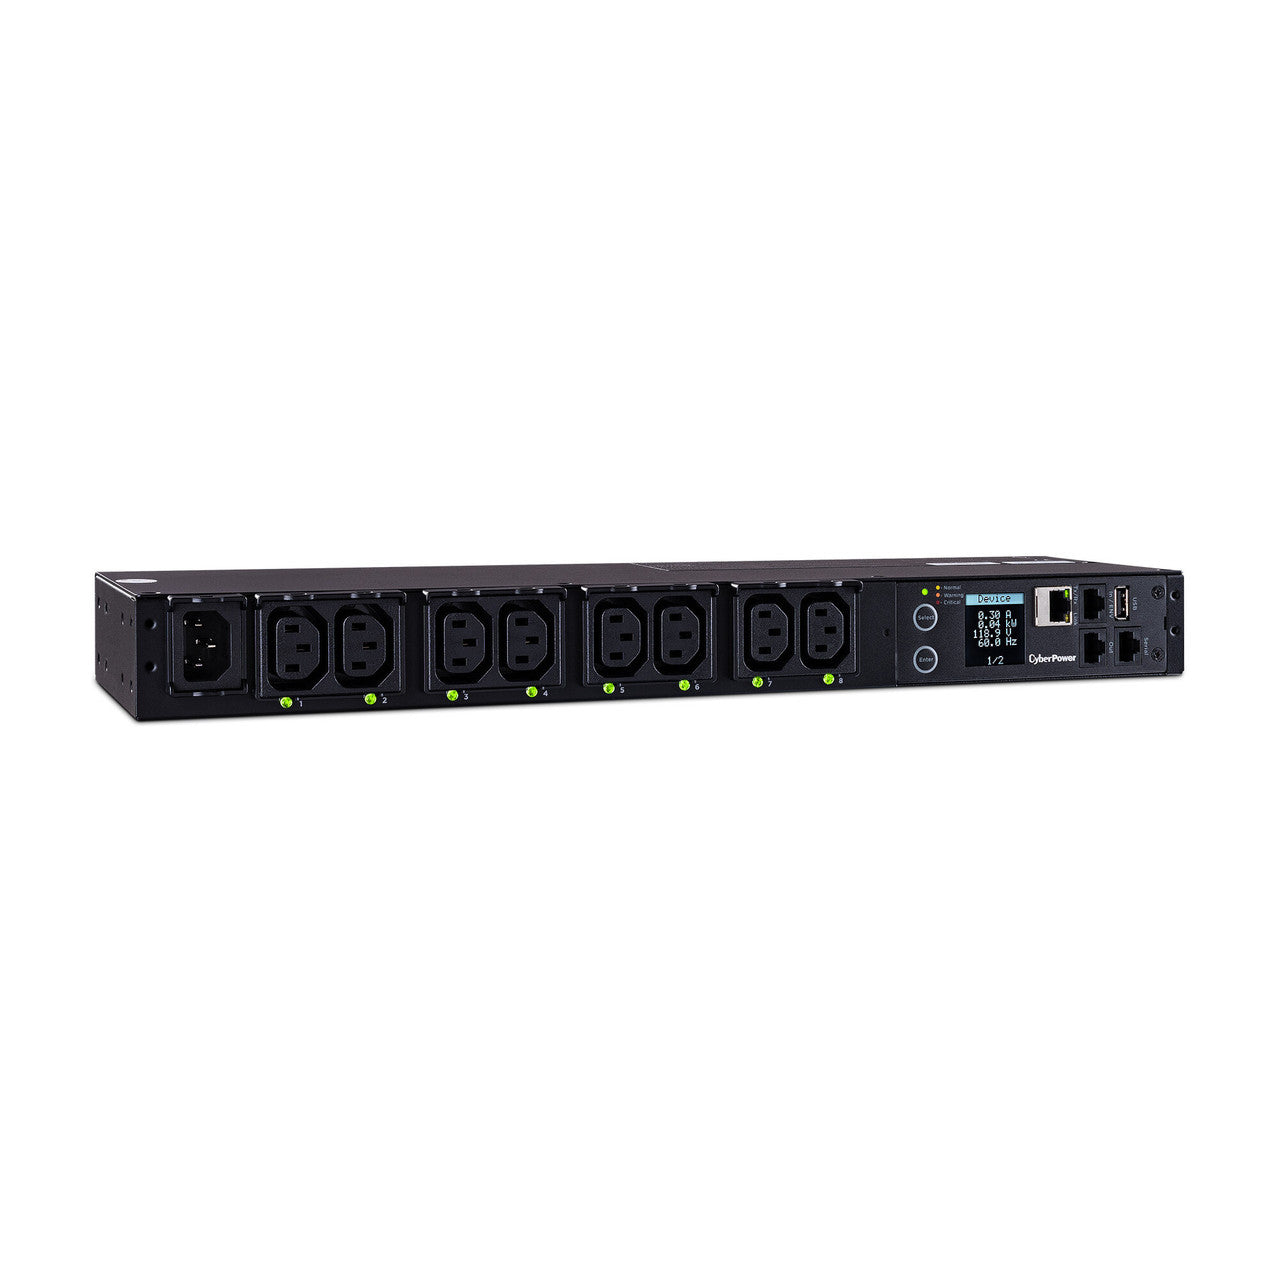 CyberPower PDU41004 SWITCHED PDU, 15A (DERATED TO 12A), 100-240V, 50/60 HZ, 8 x IEC-320 C13 OUTLETS